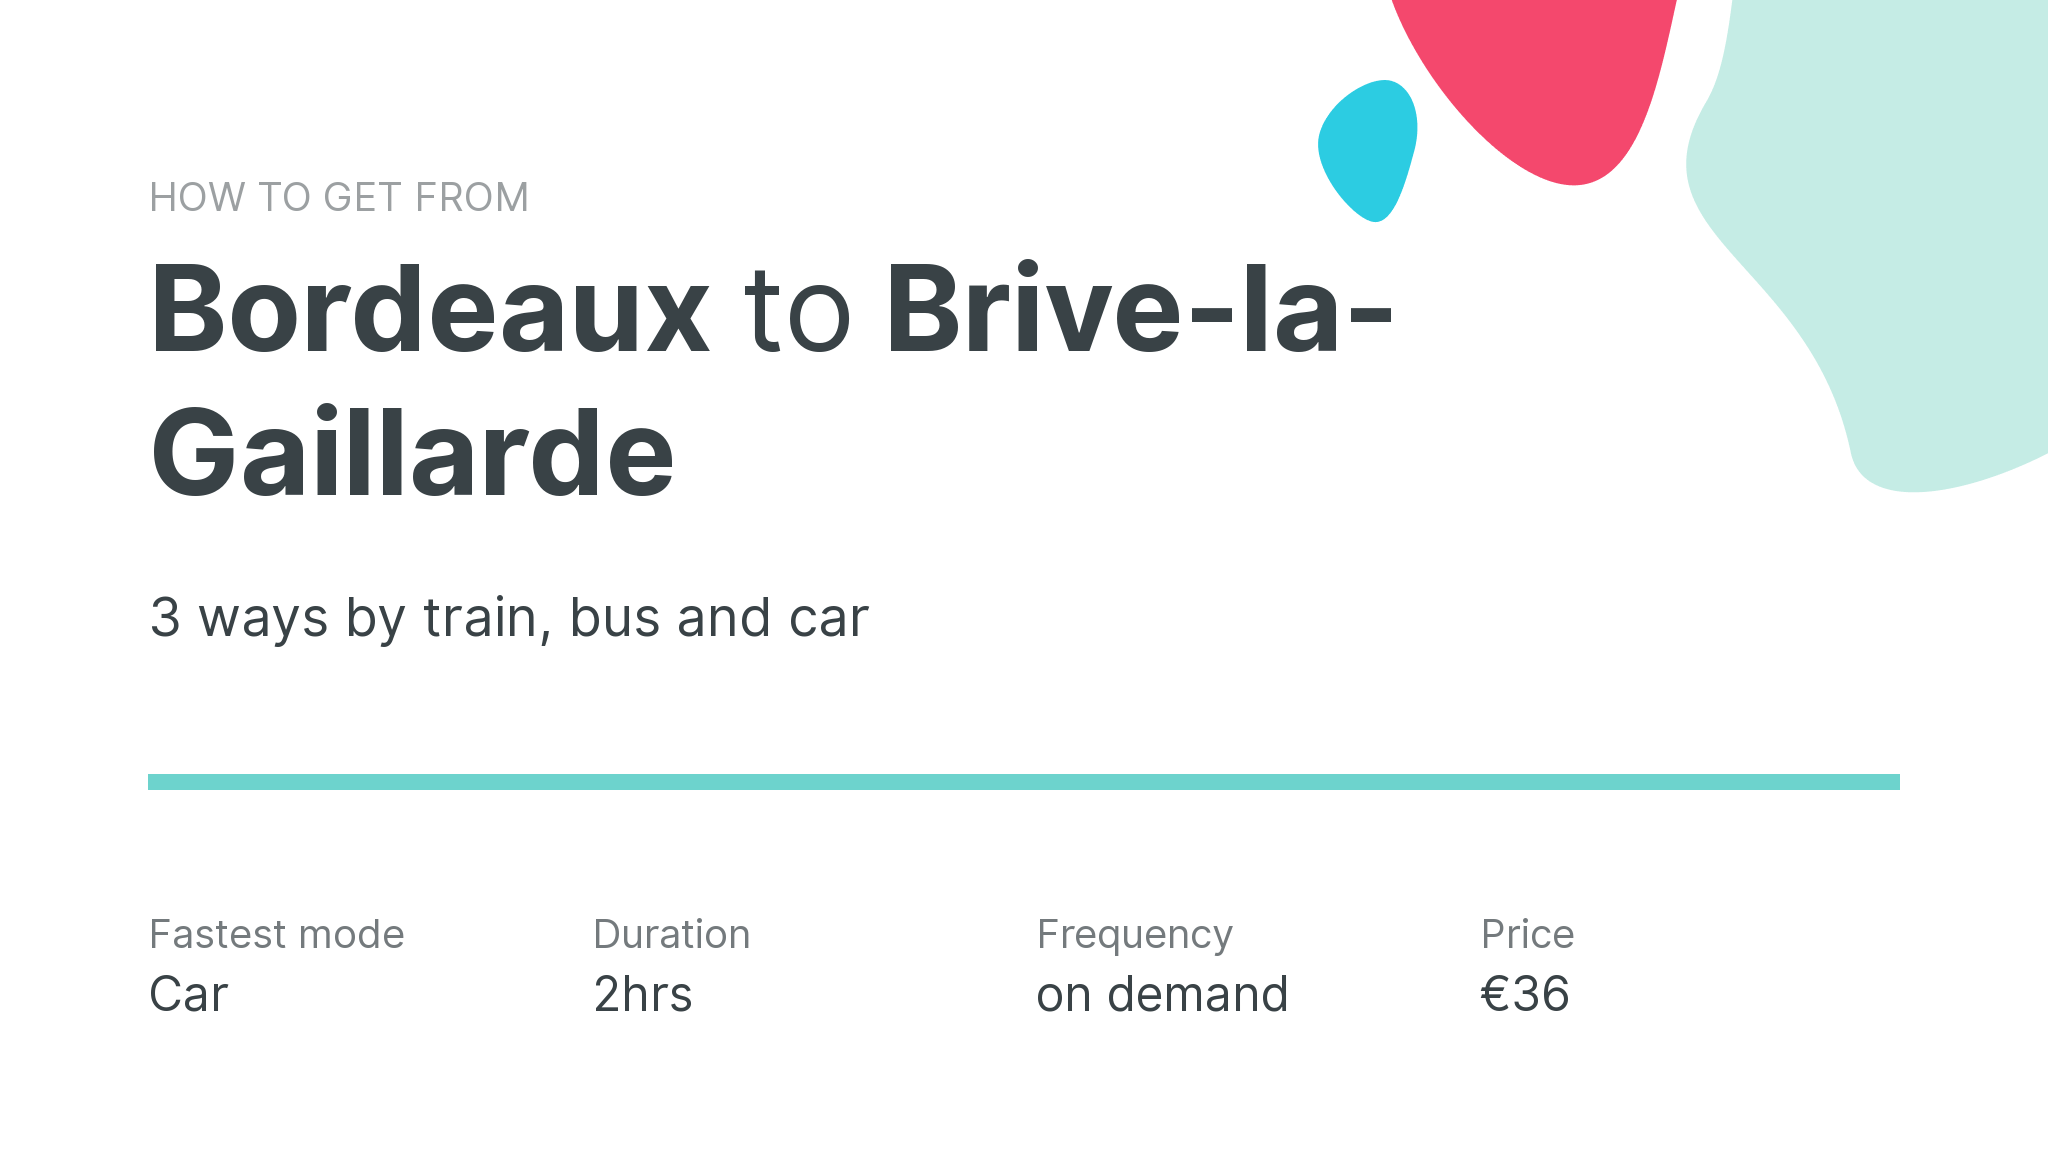 How do I get from Bordeaux to Brive-la-Gaillarde